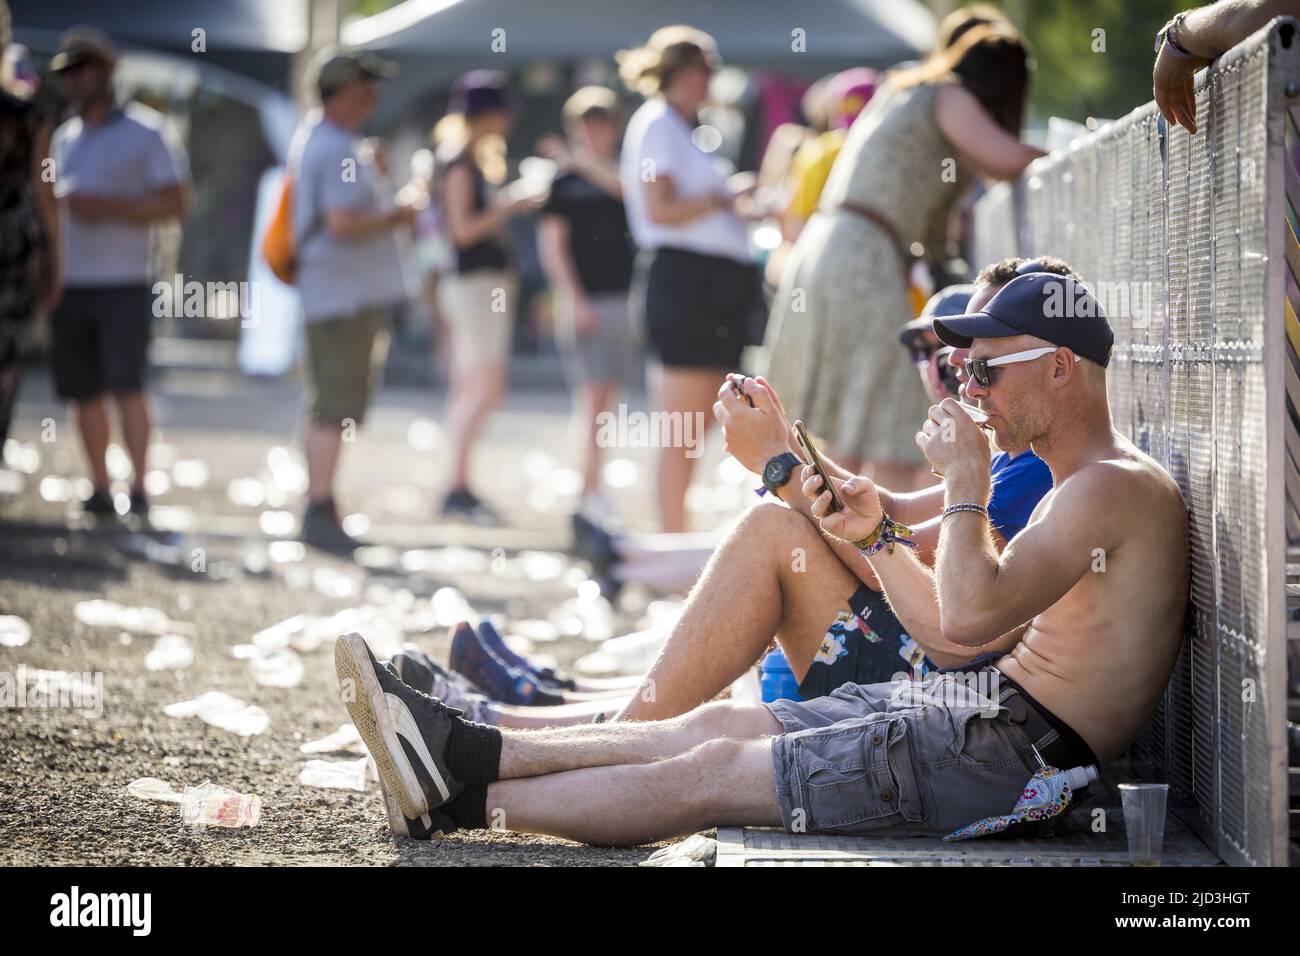 Landgraaf, Belgium. 17th June, 2022. 2022-06-17 19:18:48 LANDGRAAF - Festival-goers during the first day of the Pinkpop music festival. ANP MARCEL VAN HOORN netherlands out - belgium out Credit: ANP/Alamy Live News Stock Photo